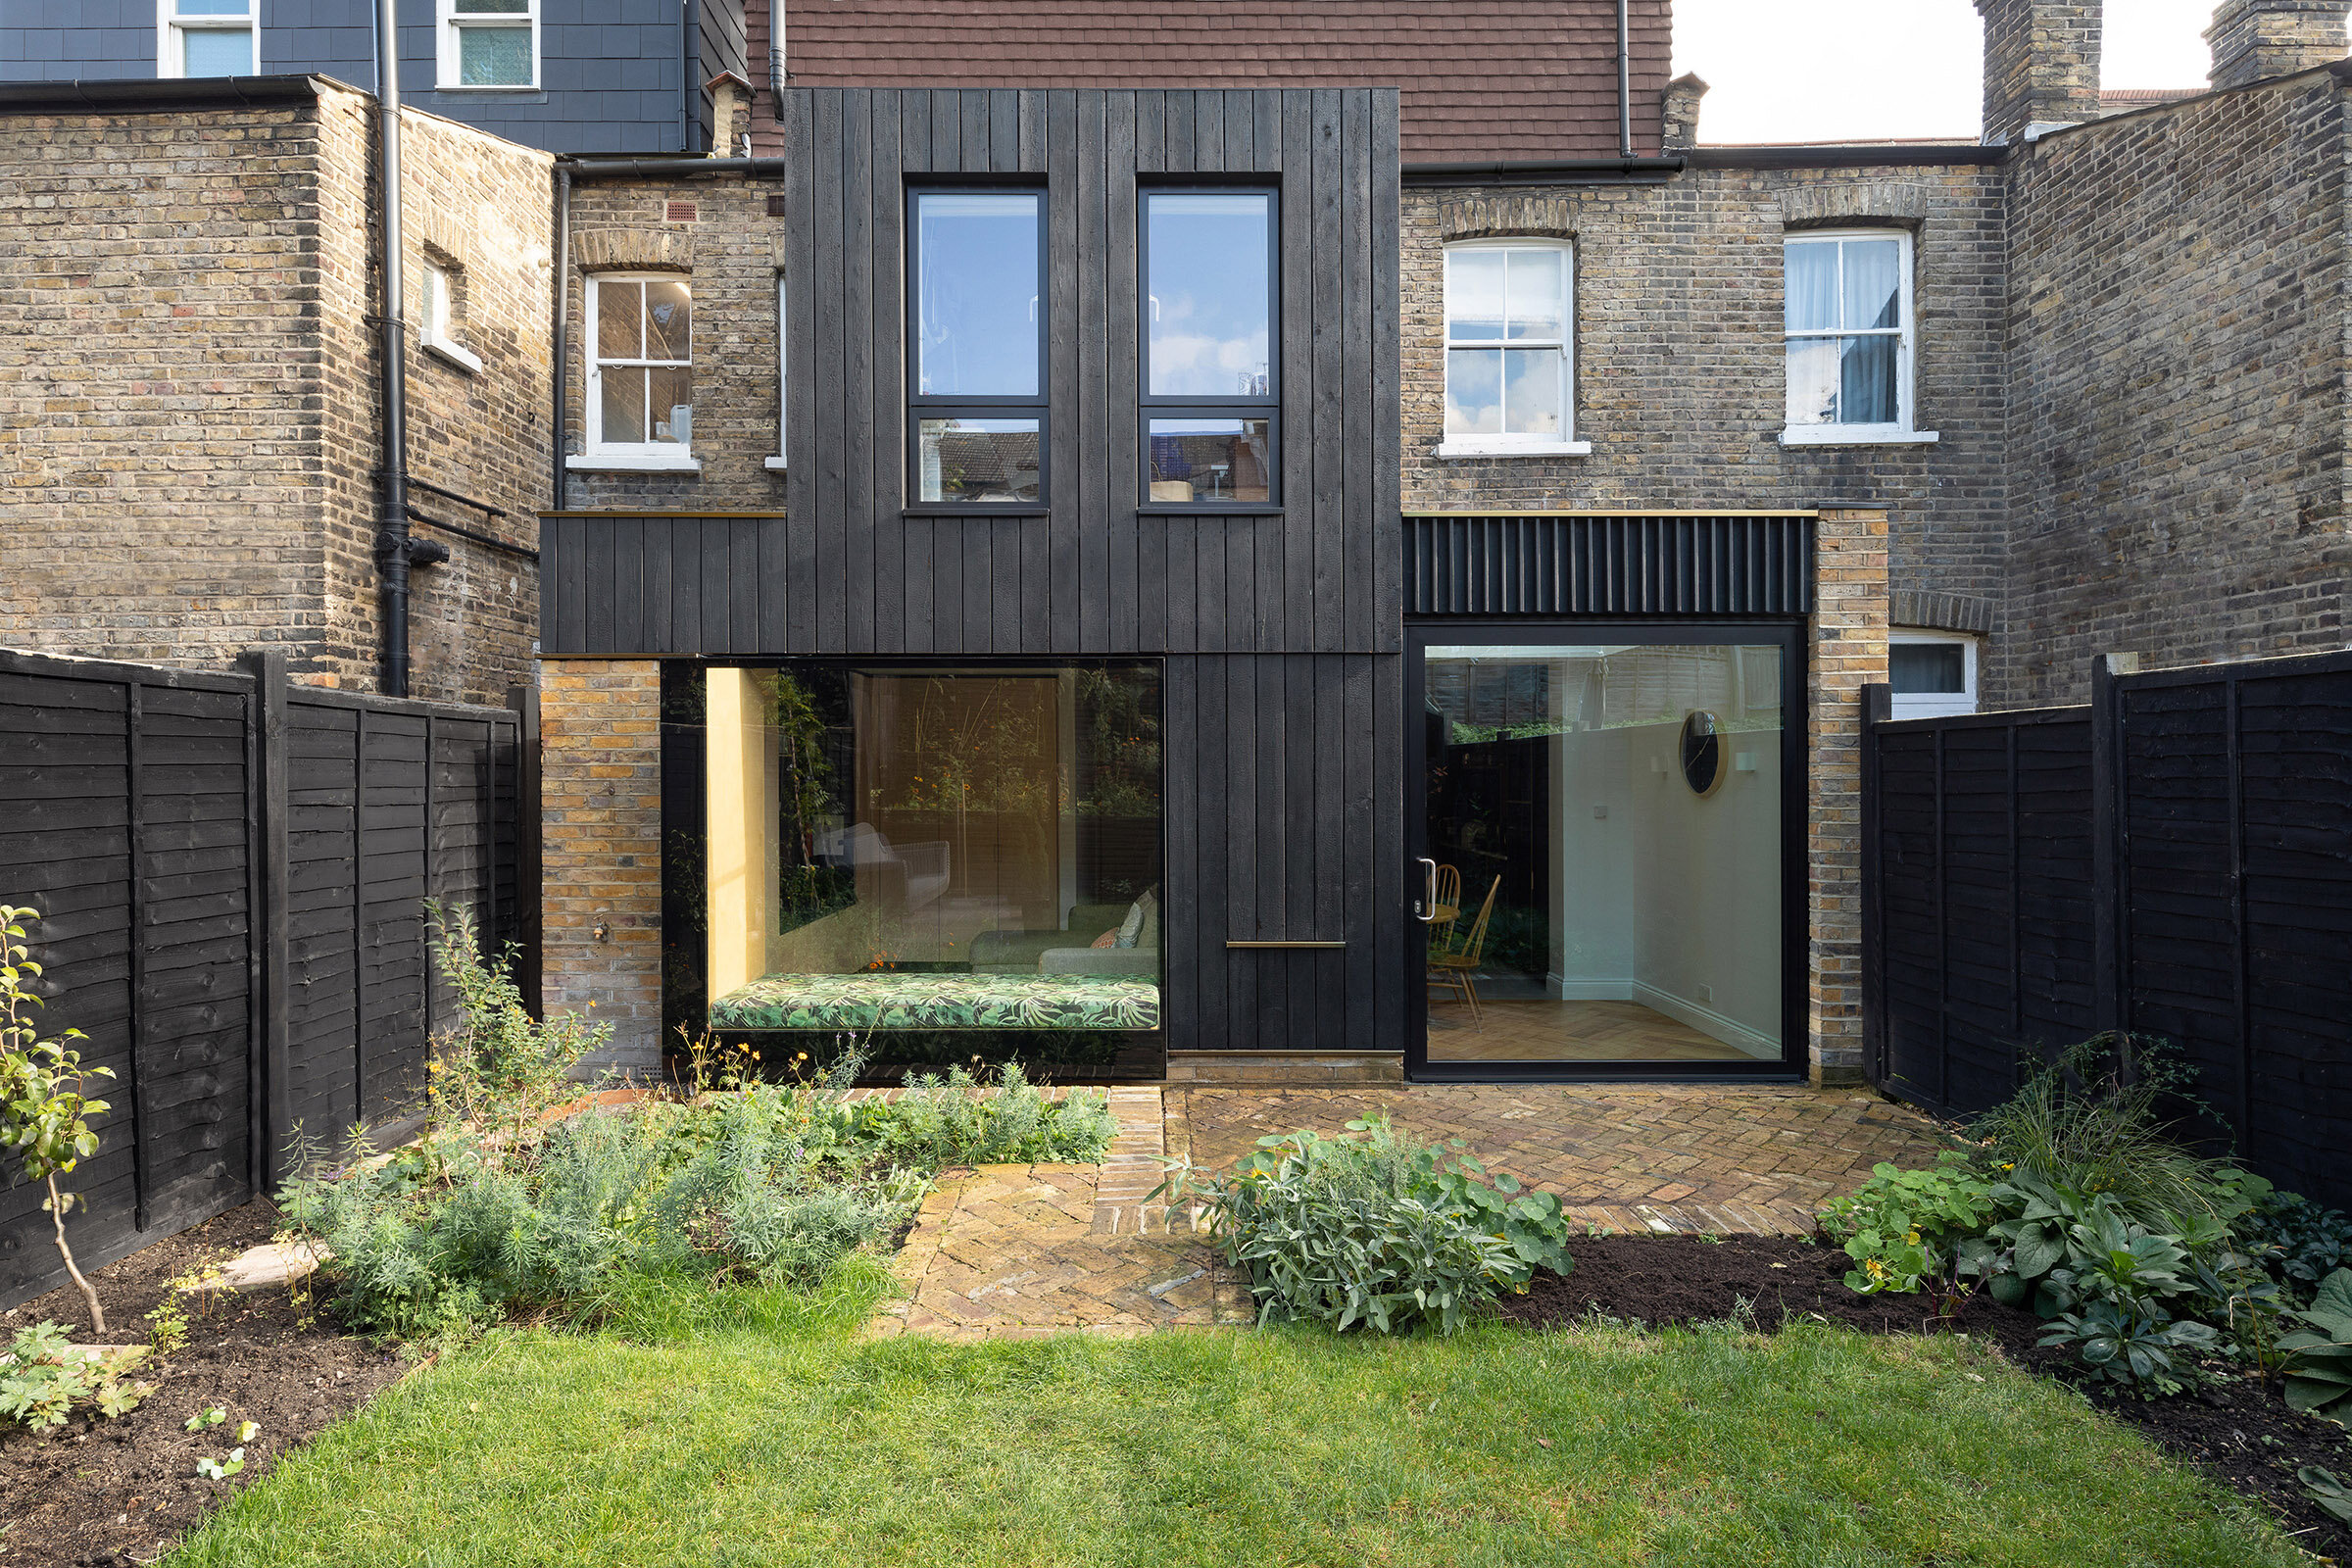 01-charred-house-victorian-terrace-extension-rear-elevation-architecture-ladywell-lewisham-london-uk-rider-stirland-architects.jpg